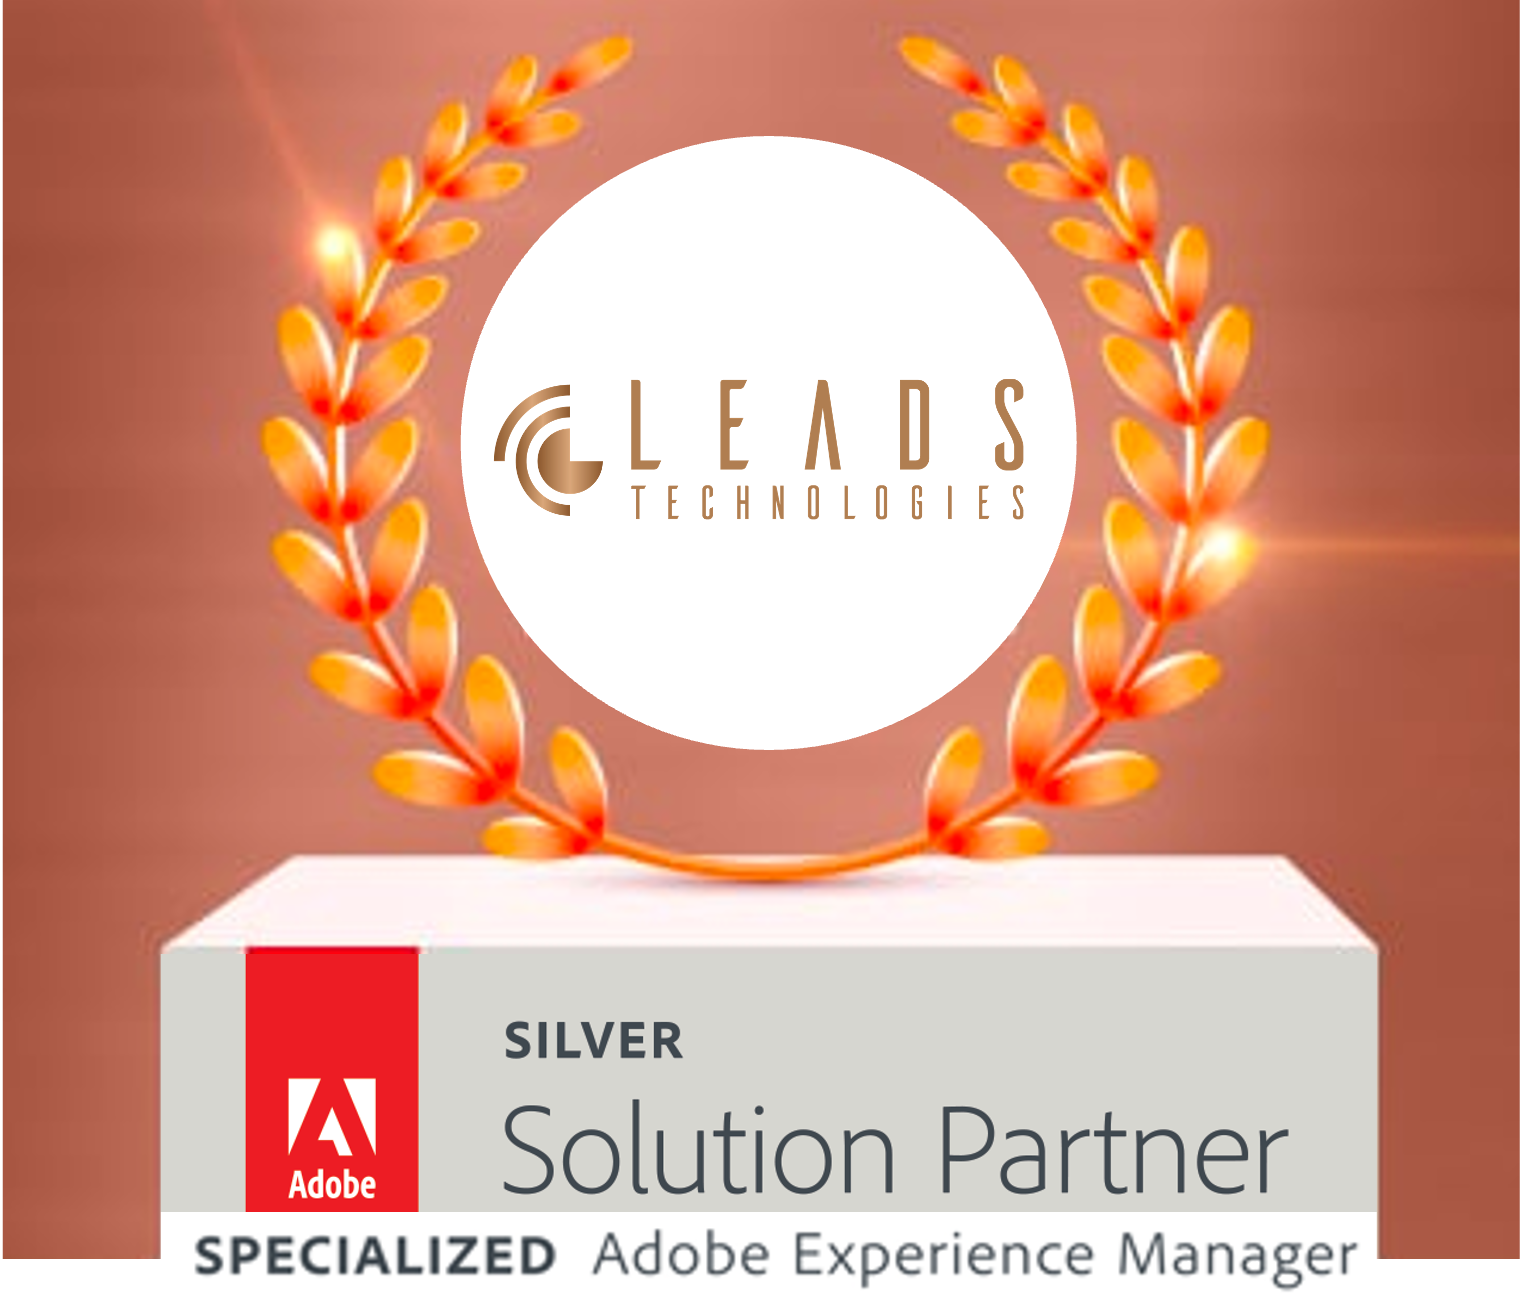 Specialized Adobe Experience Manager Leadstec Technology